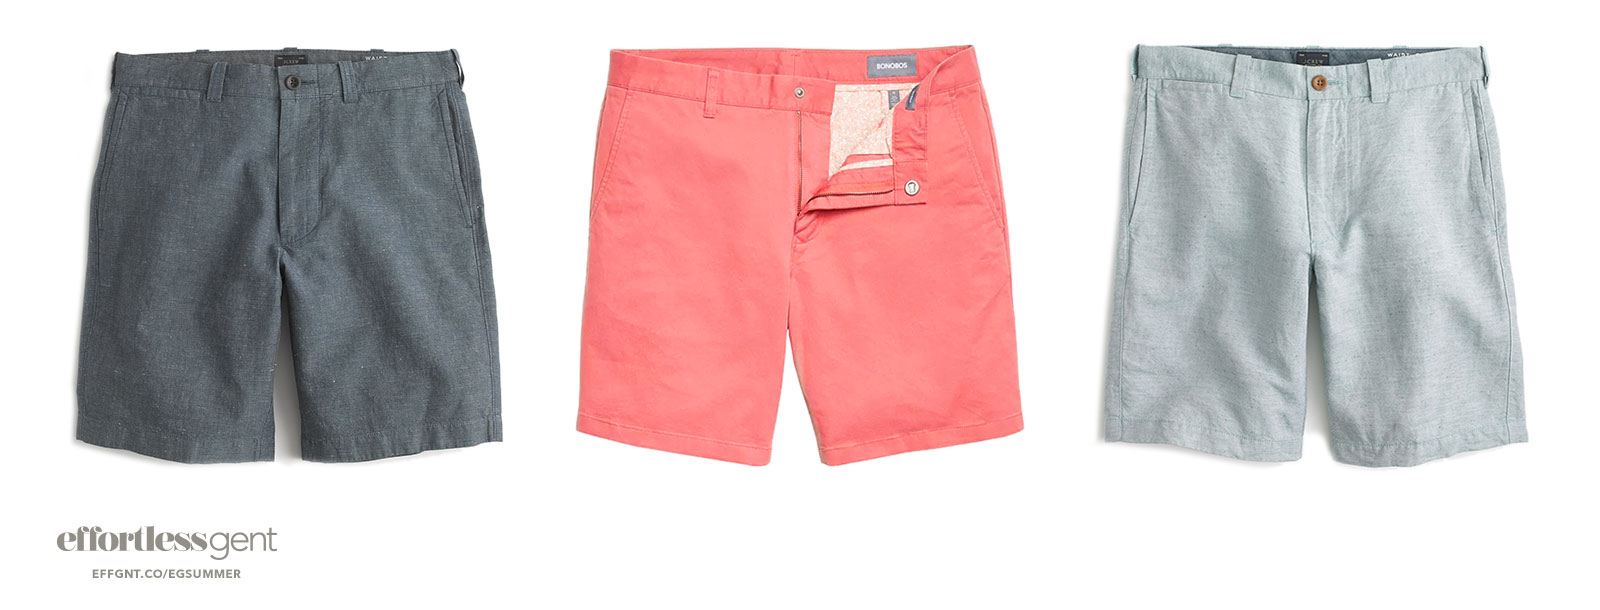 shorts - the best shorts for men